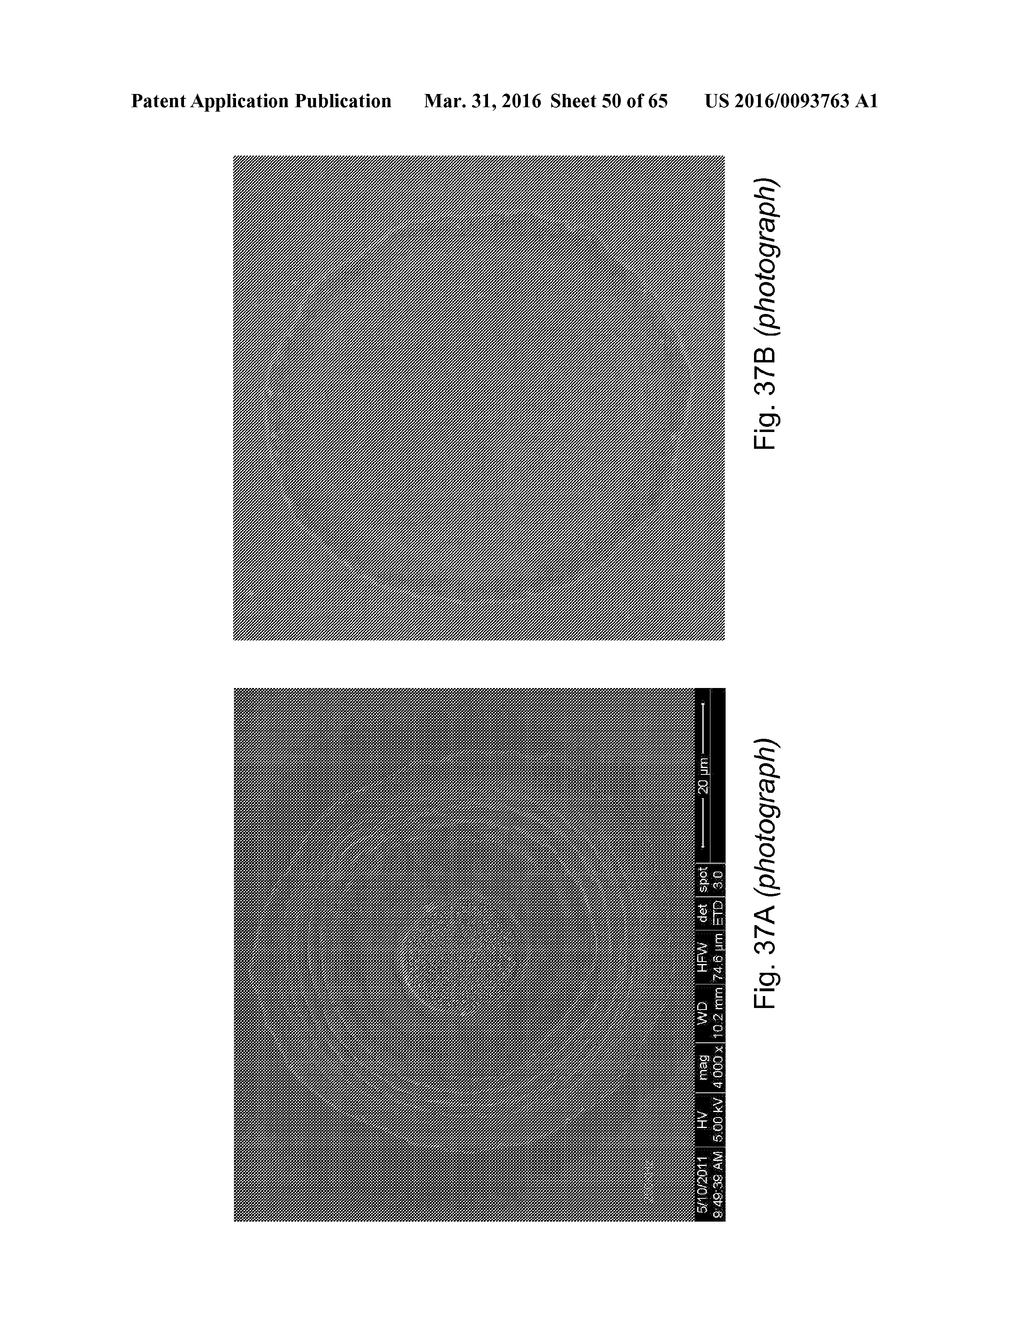 DAMAGE FREE LASER PATTERNING OF TRANSPARENT LAYERS FOR FORMING DOPED     REGIONS ON A SOLAR CELL SUBSTRATE - diagram, schematic, and image 51